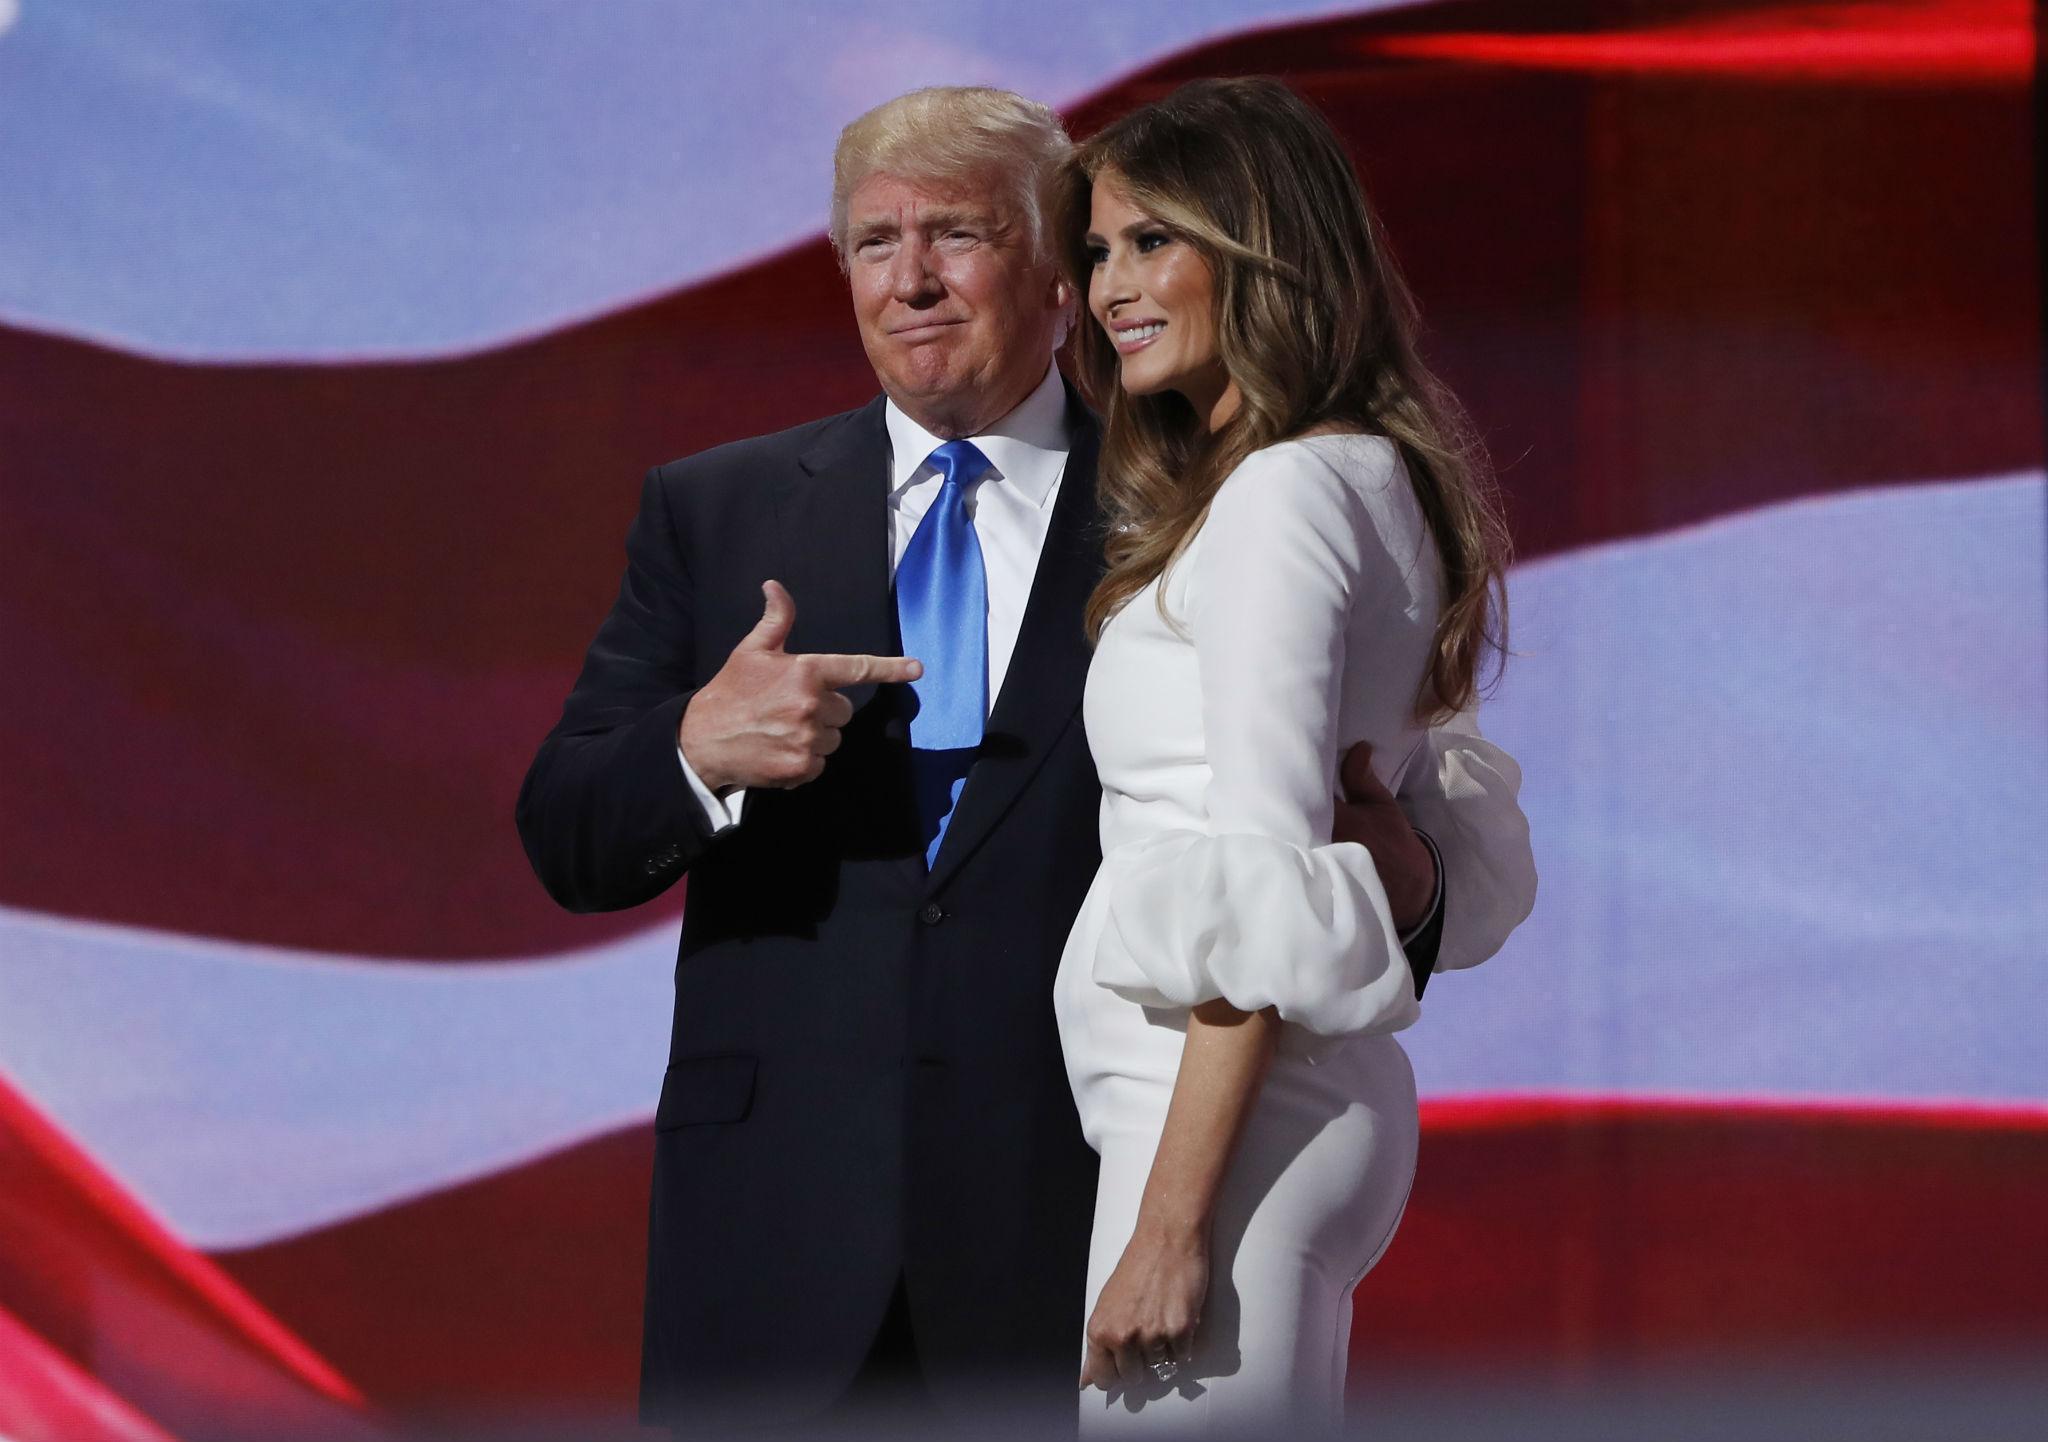 Melania Trump wanted 'the people of the United States to see the man she loves,' Mr Manafort said on Tuesday